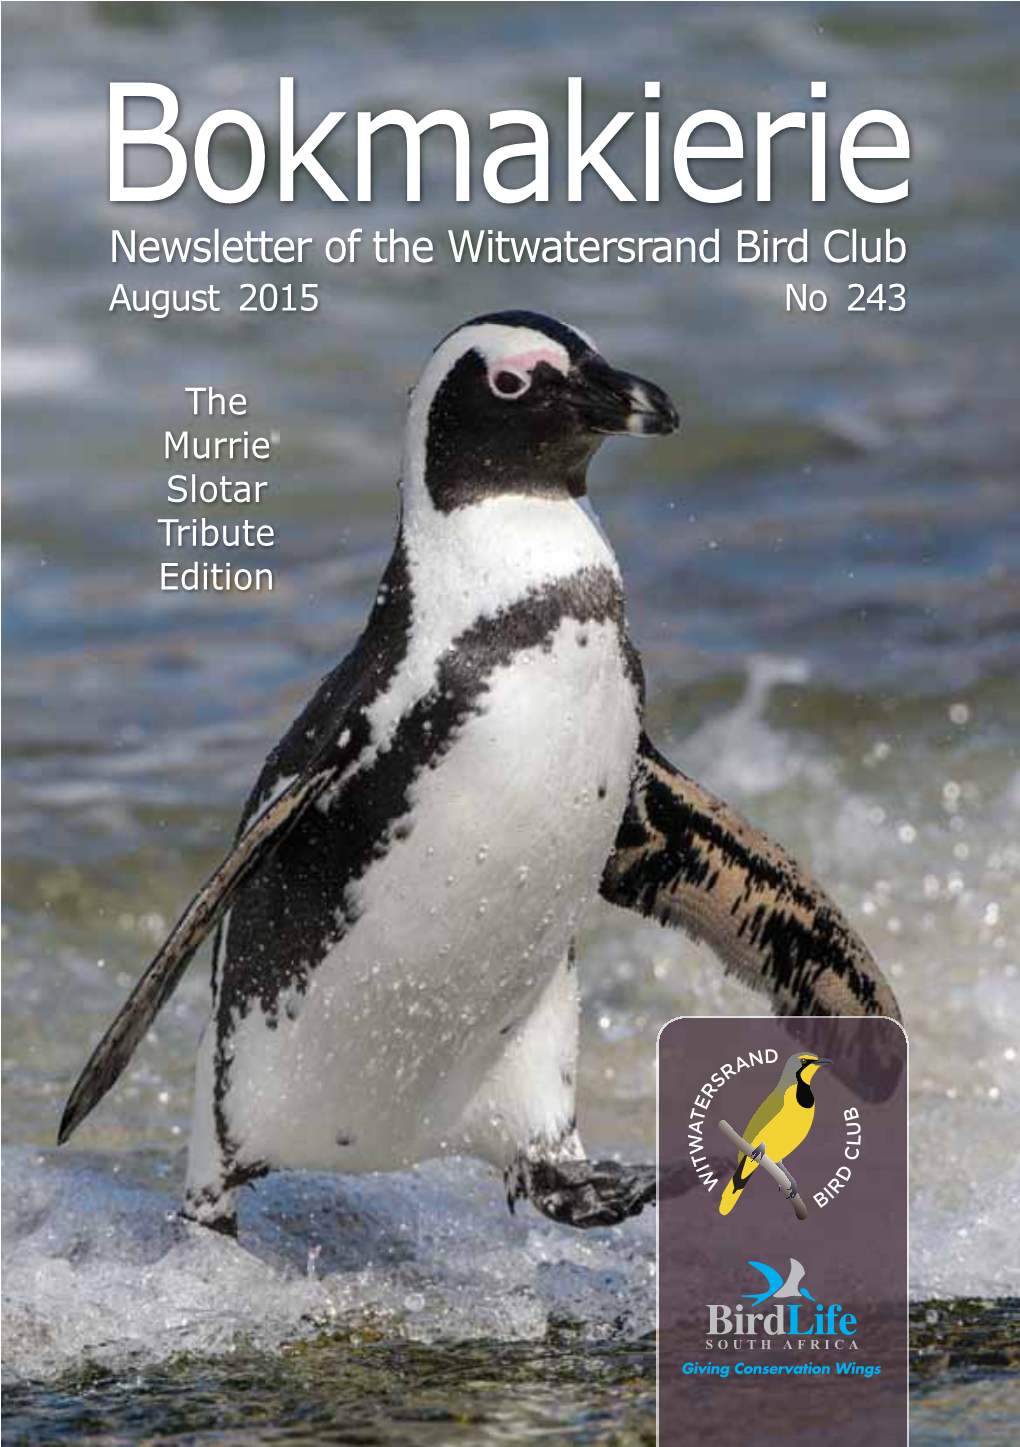 Bokmakierie Newsletter of the Witwatersrand Bird Club August 2015 No 243